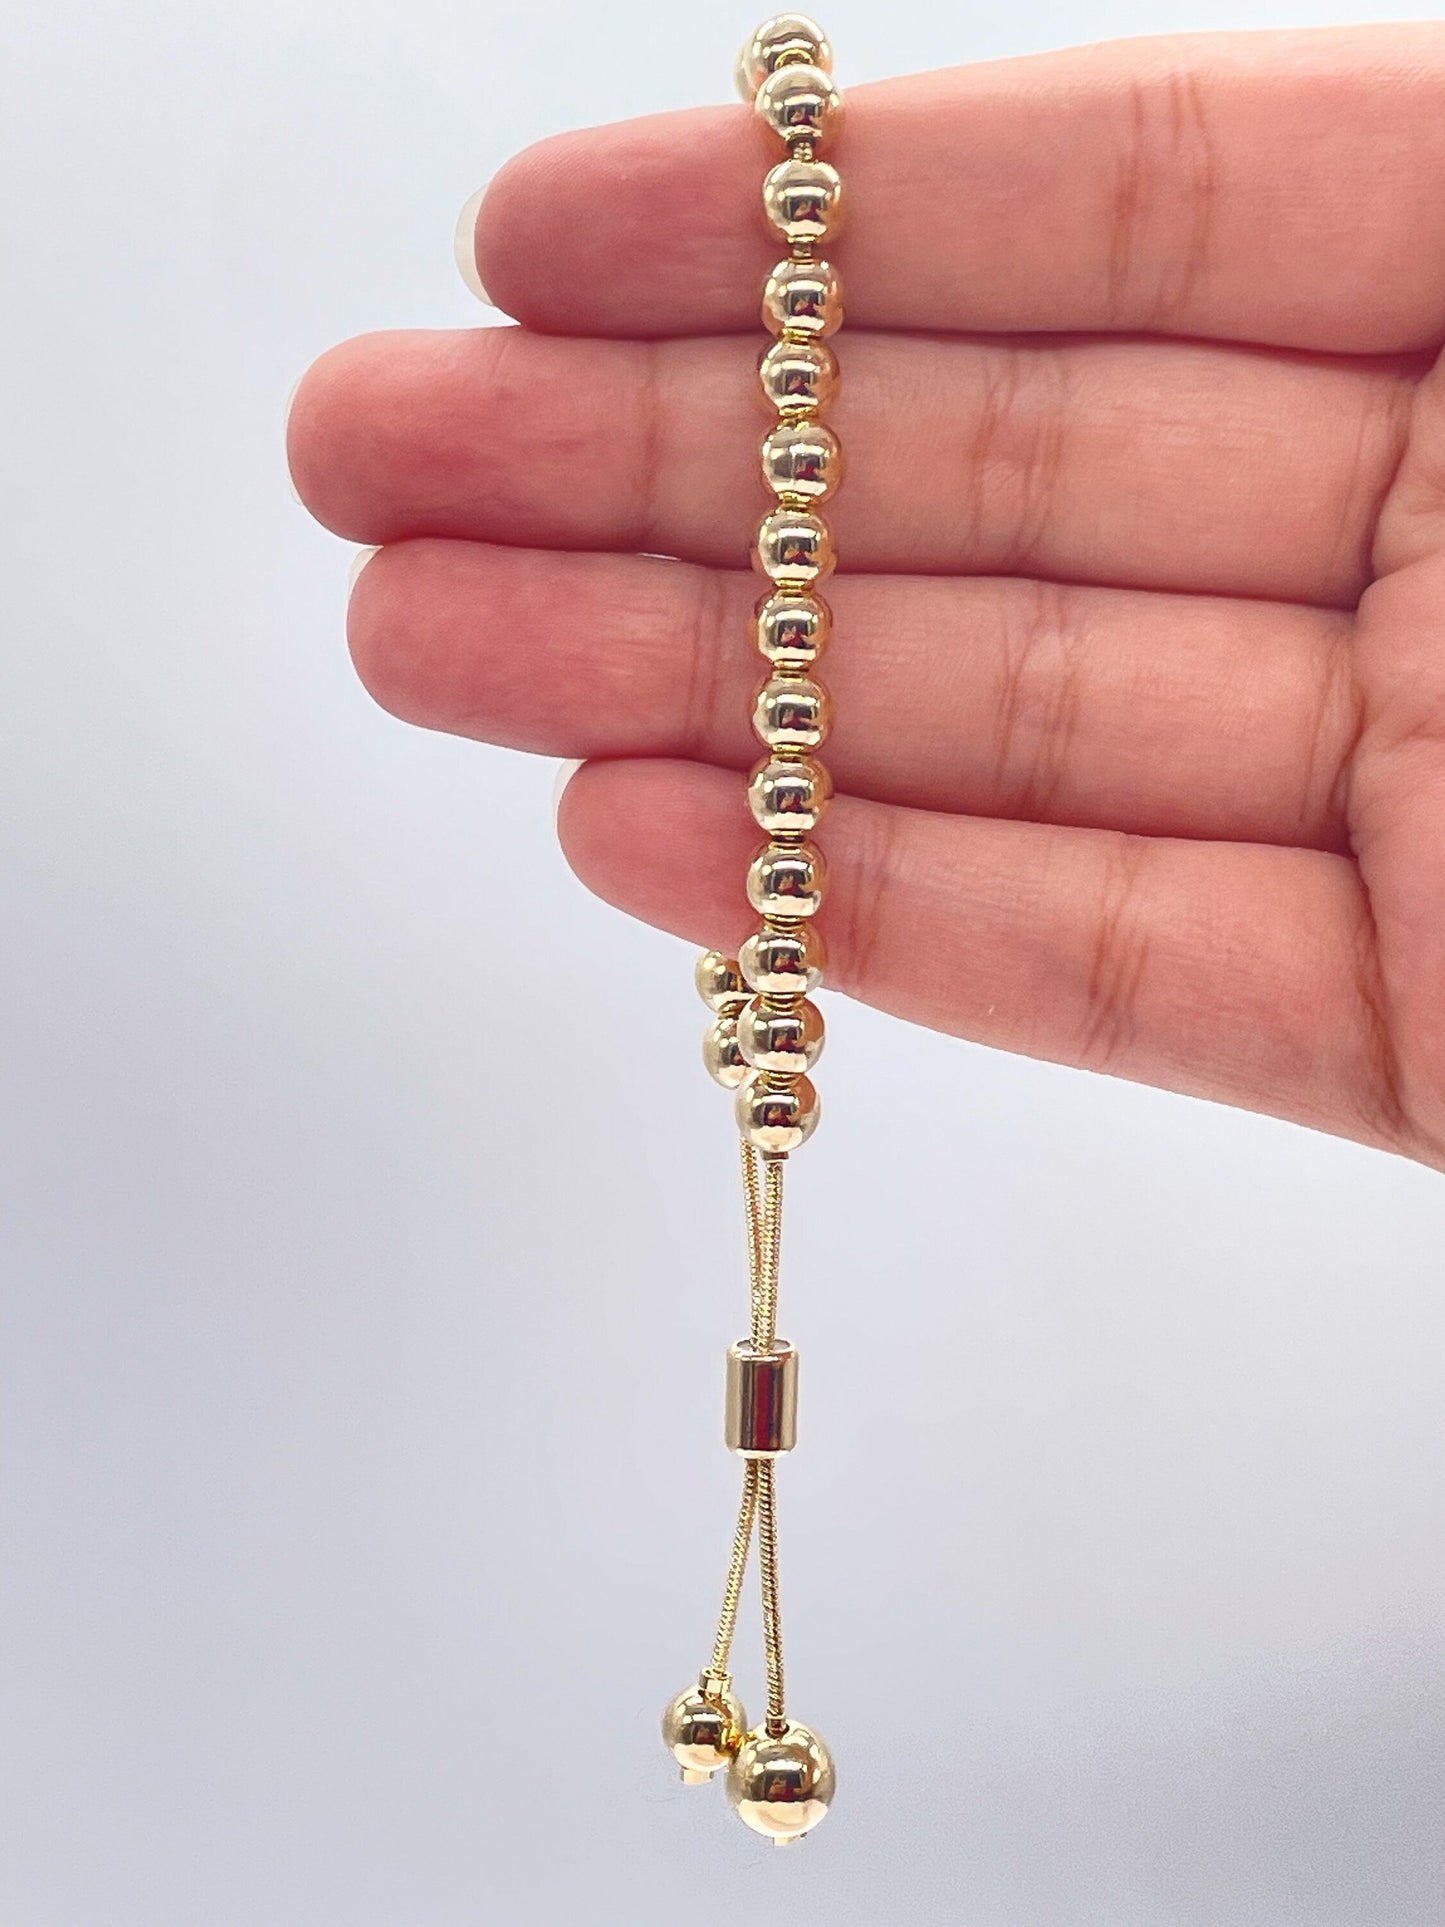 Gorgeous 18k Gold Layered Beaded Bracelet Featuring Slide Clasp Gold Bead